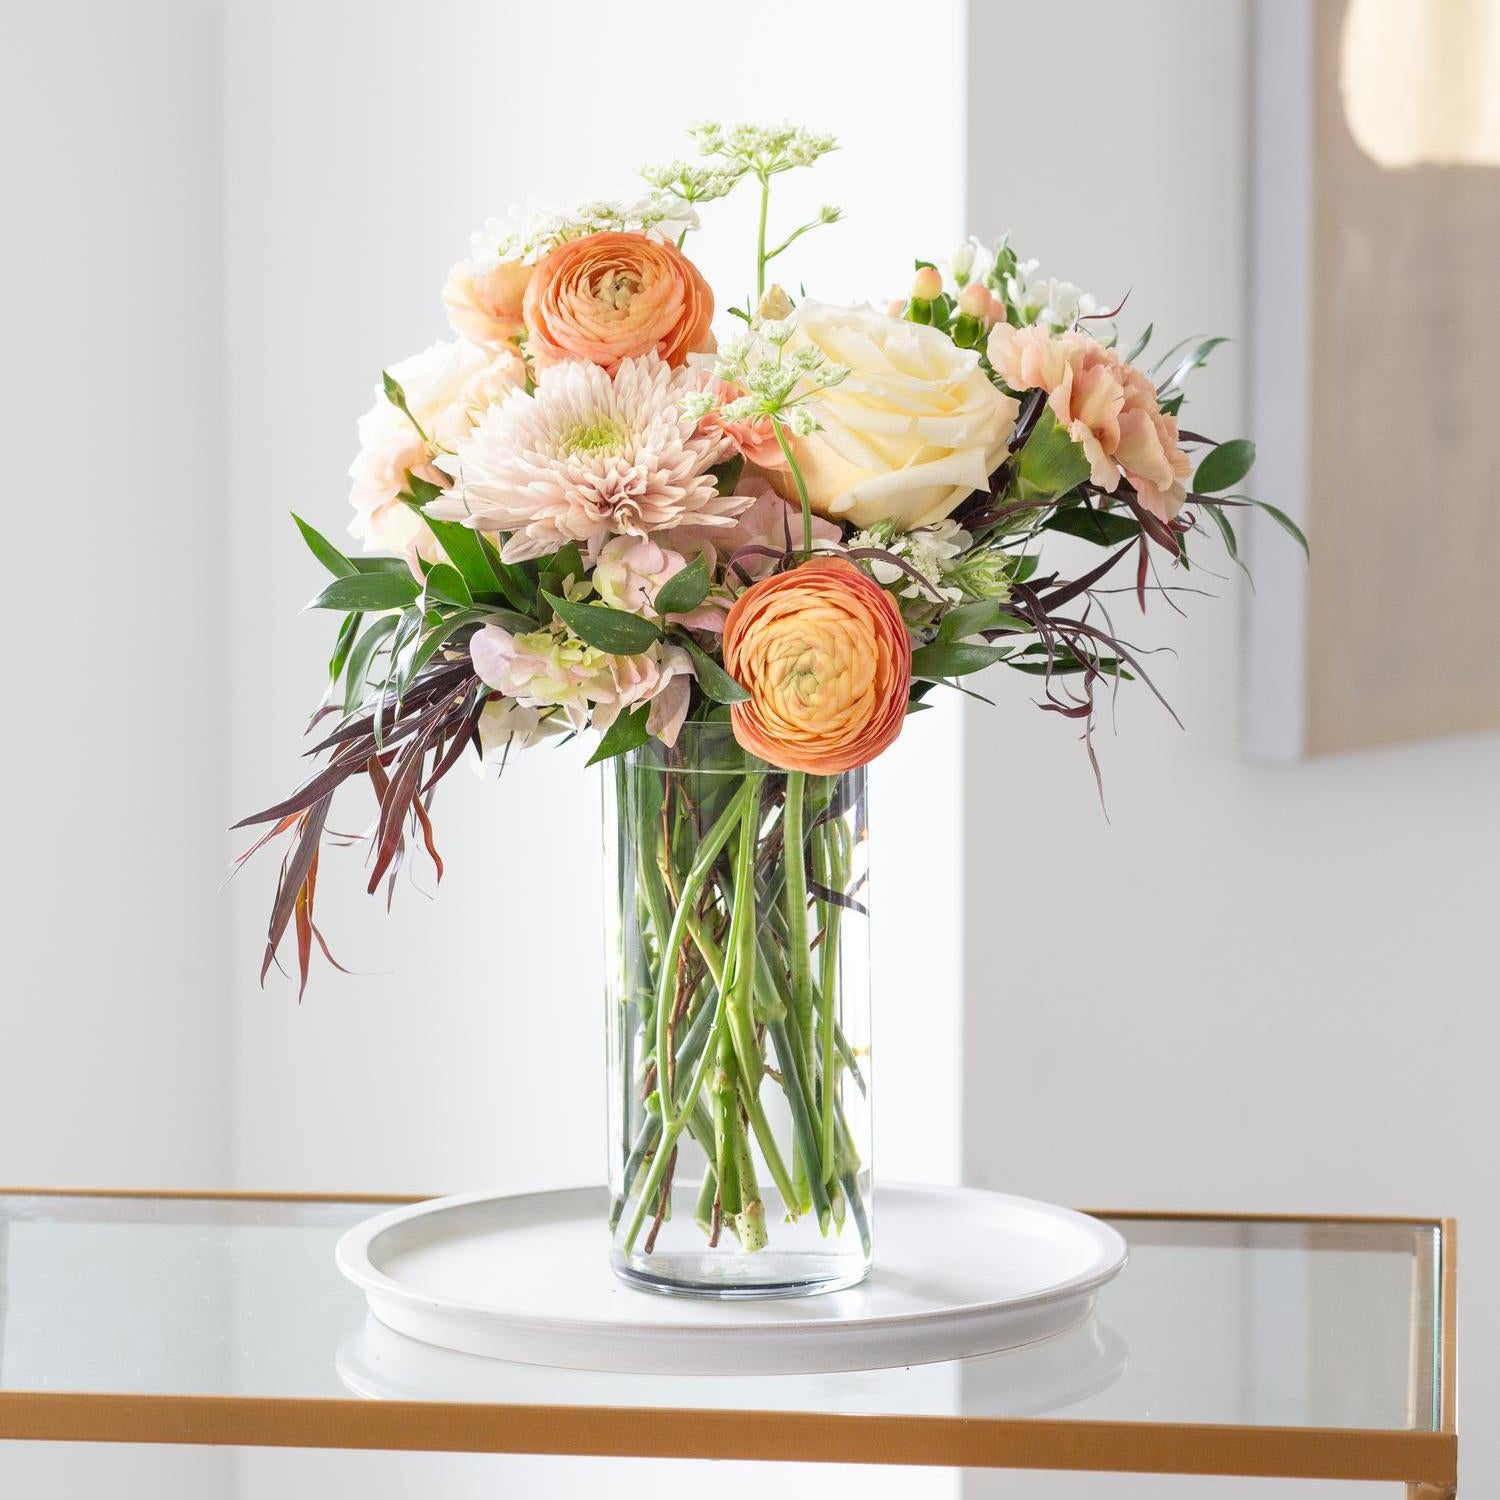 Tall cylinder vase displaying a sophisticated arrangement of peach ranunculus, blush dahlias, and delicate white accents in a modern living space.